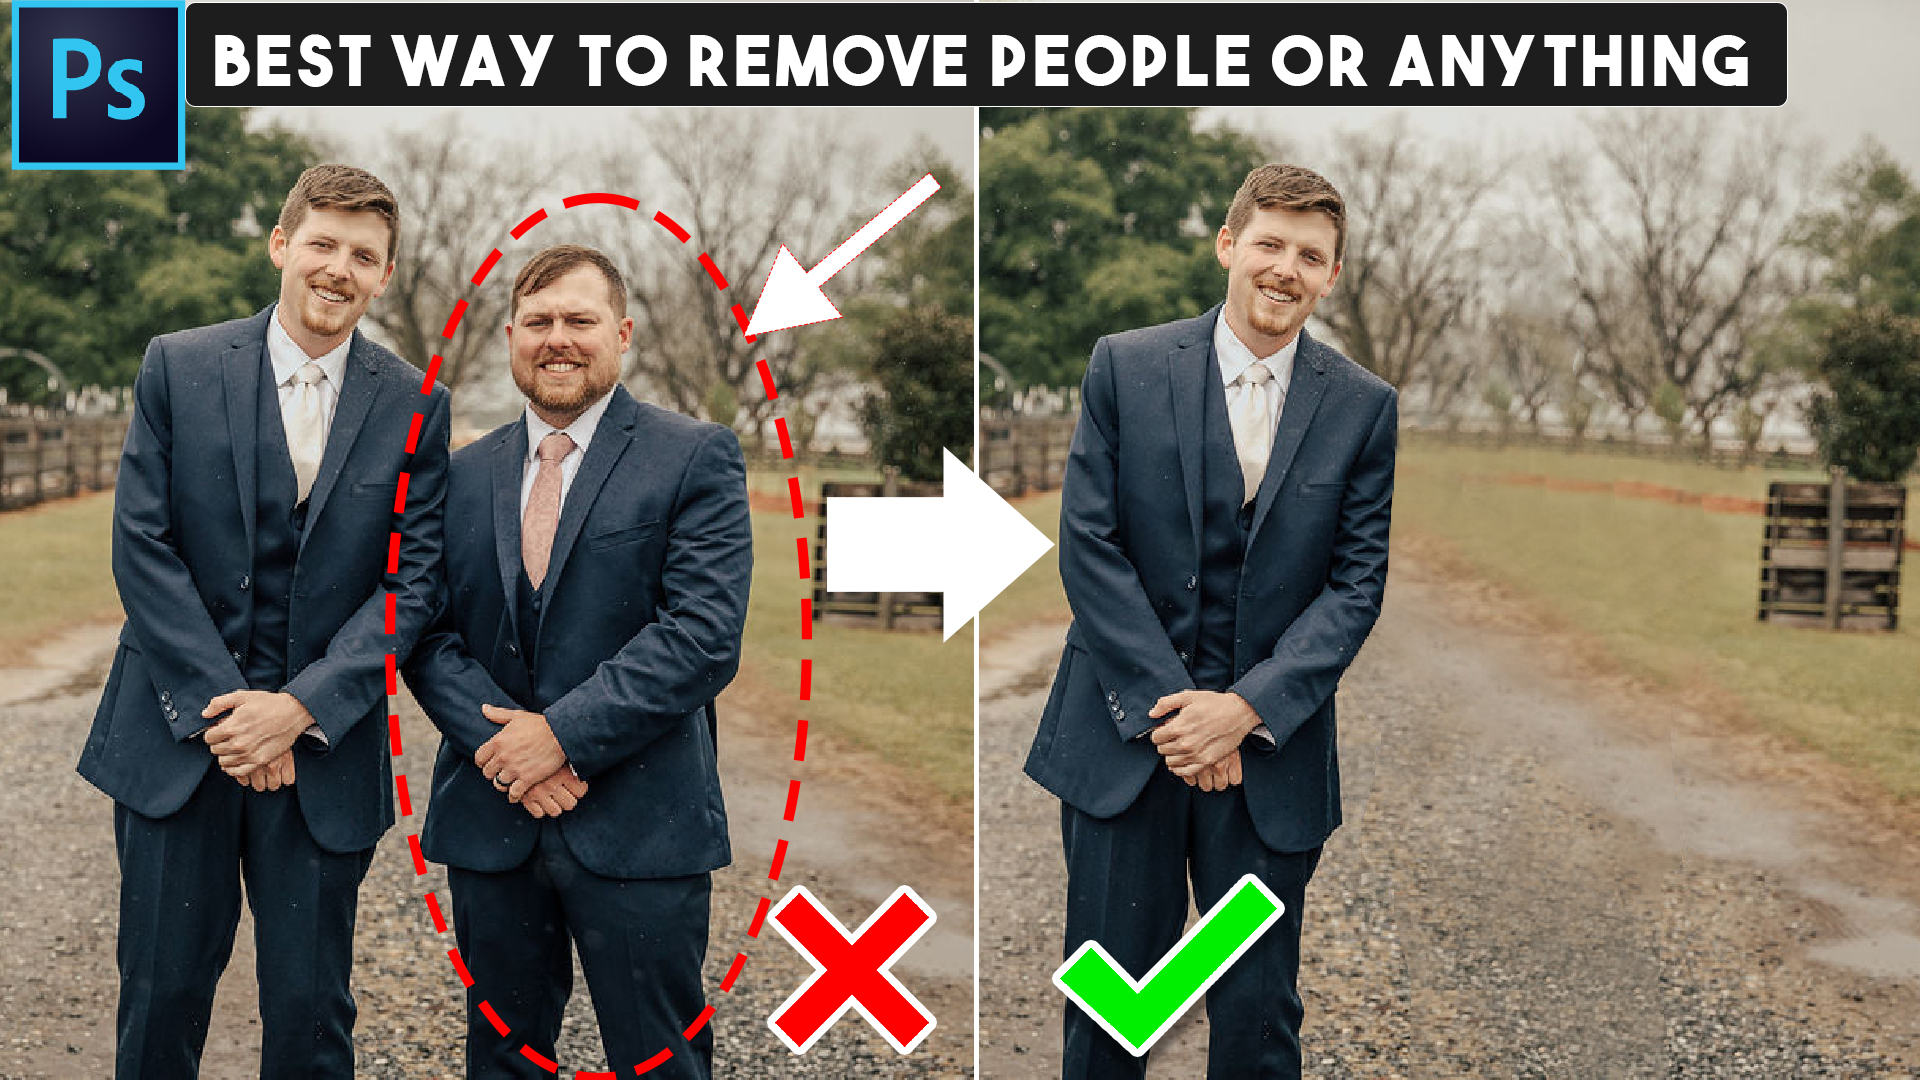 Best%20Way%20REMOVE%20PEOPLE%20or%20ANYTHING%20from%20Photo%20in%201%20Min%20Photoshop%20Hidden